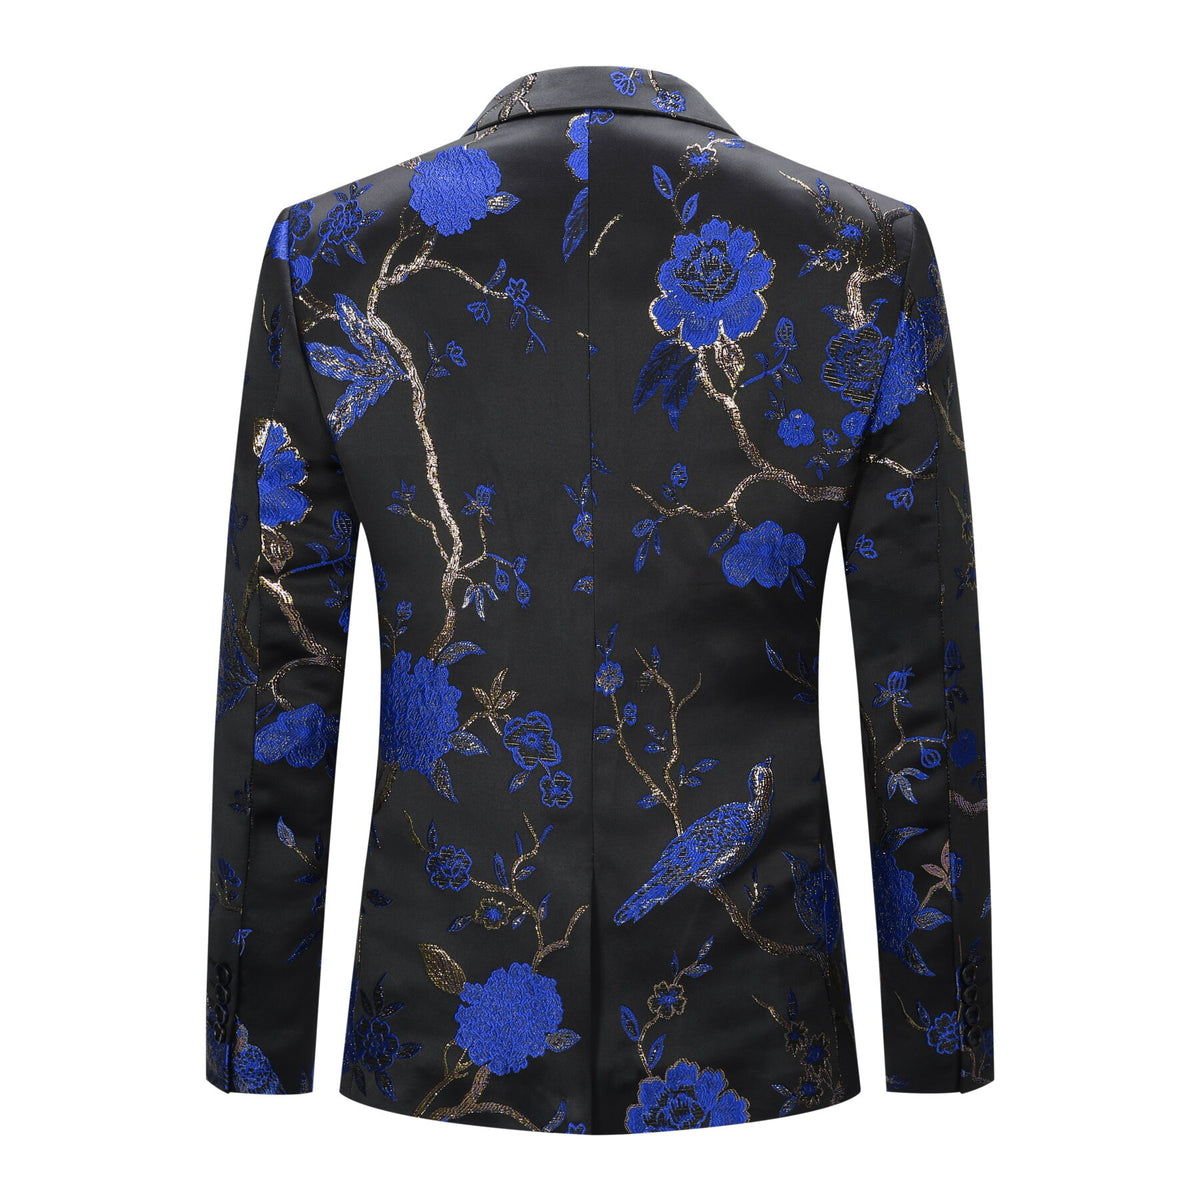 Men's One Button Notched Lapel Embroidered Blazer Blue